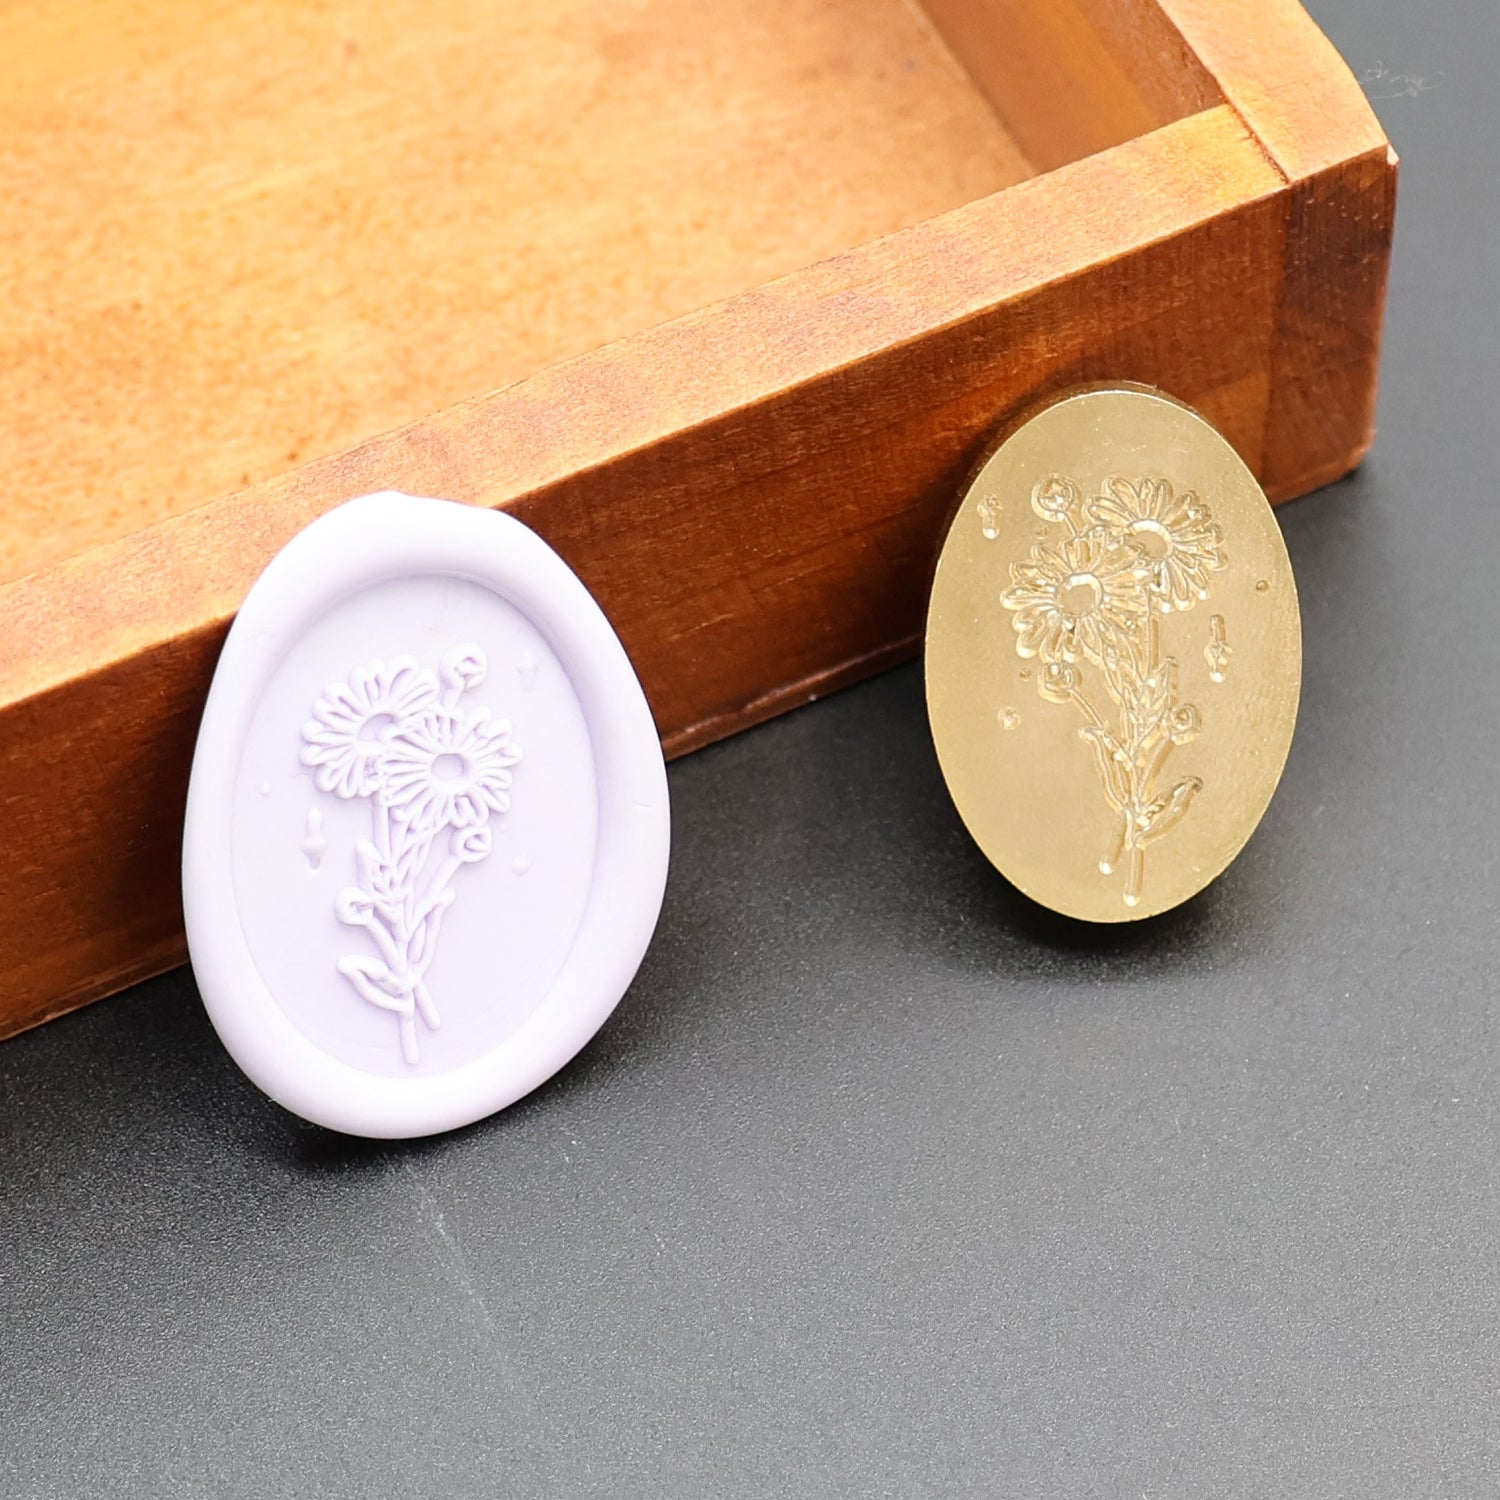 Oval Fully Customized Wax Seal Stamp with Your Own Artwork 3